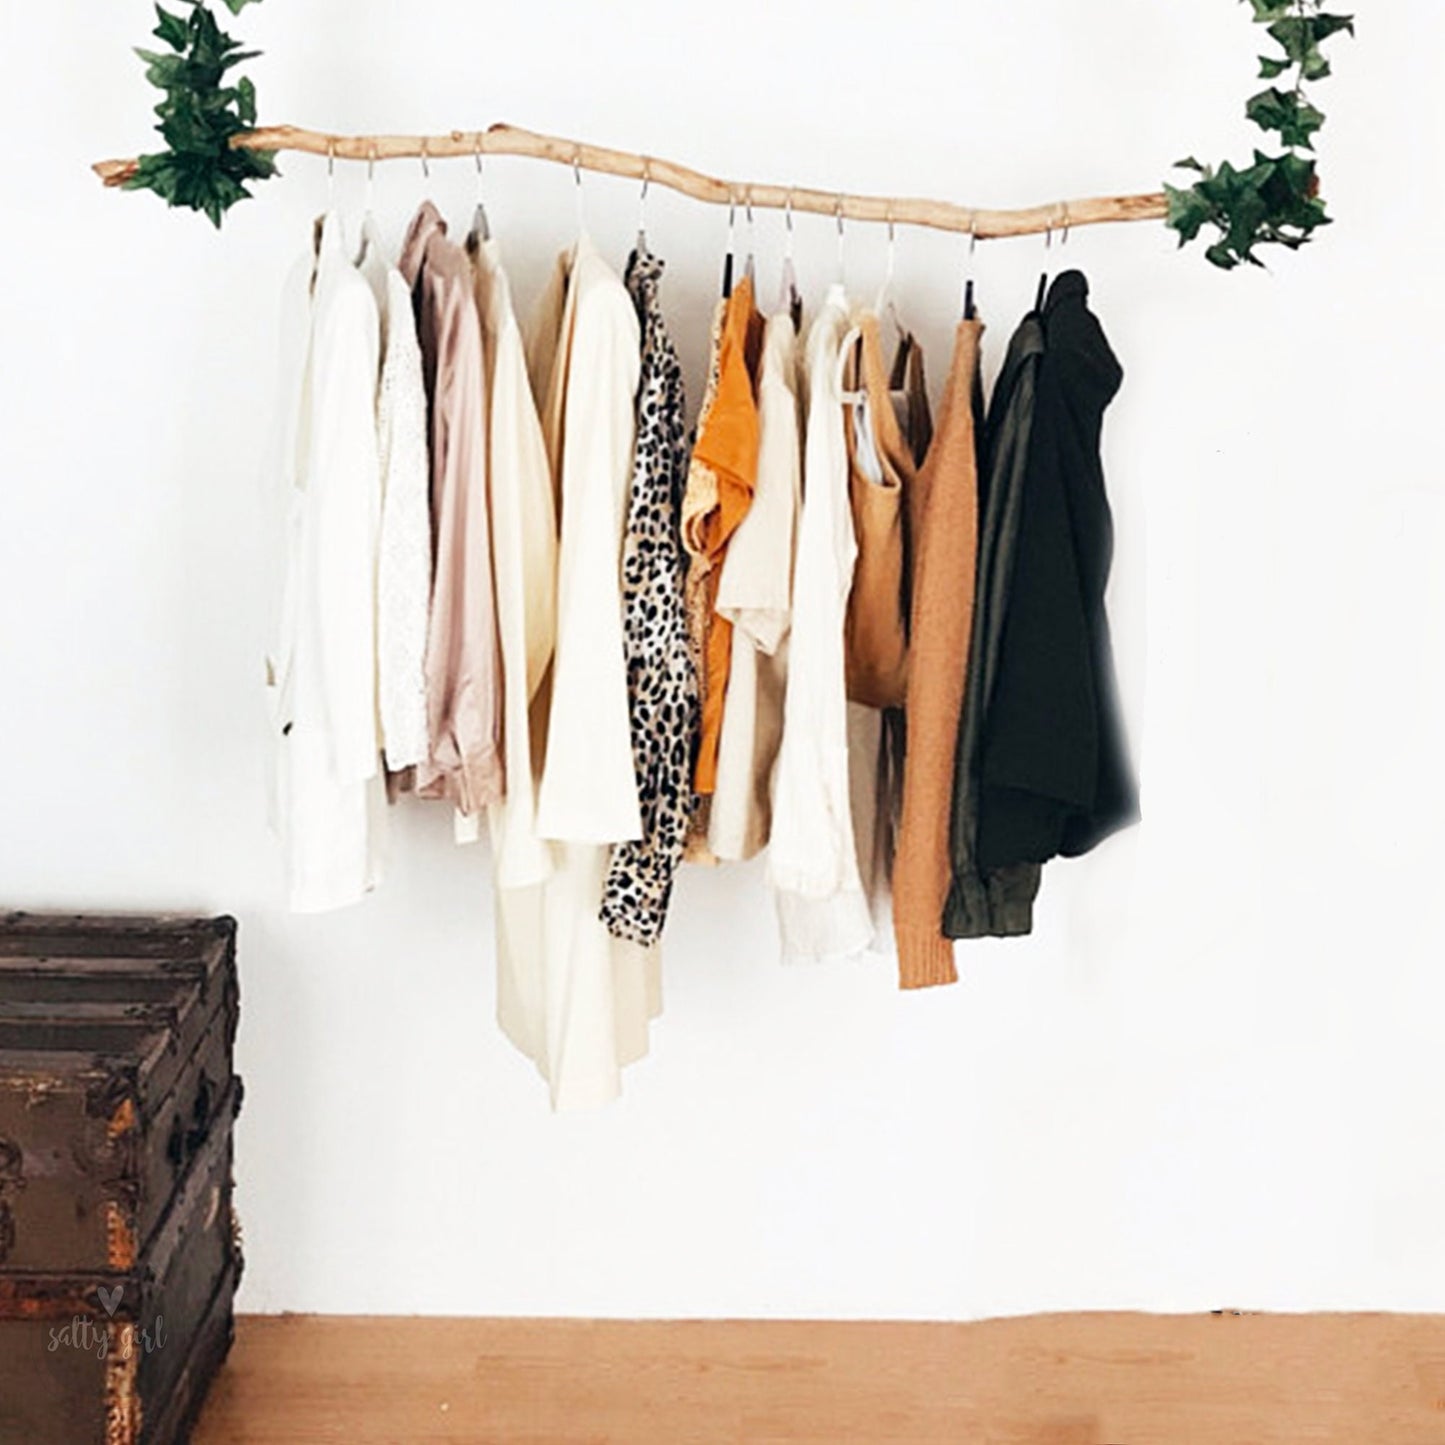 Boho Clothing Rack - Driftwood Branch Clothes Hanger for Retail Space